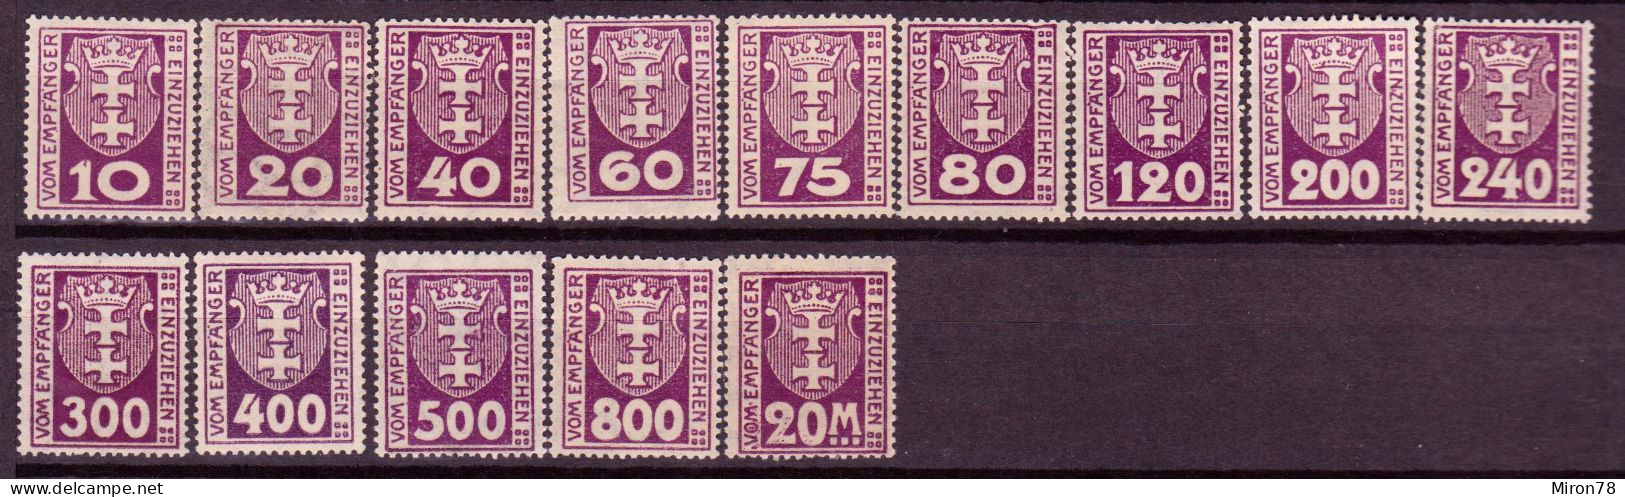 Stamps Danzig 1923 POSTAGE DUE STAMPS Mint MNH Lot6 - Postage Due